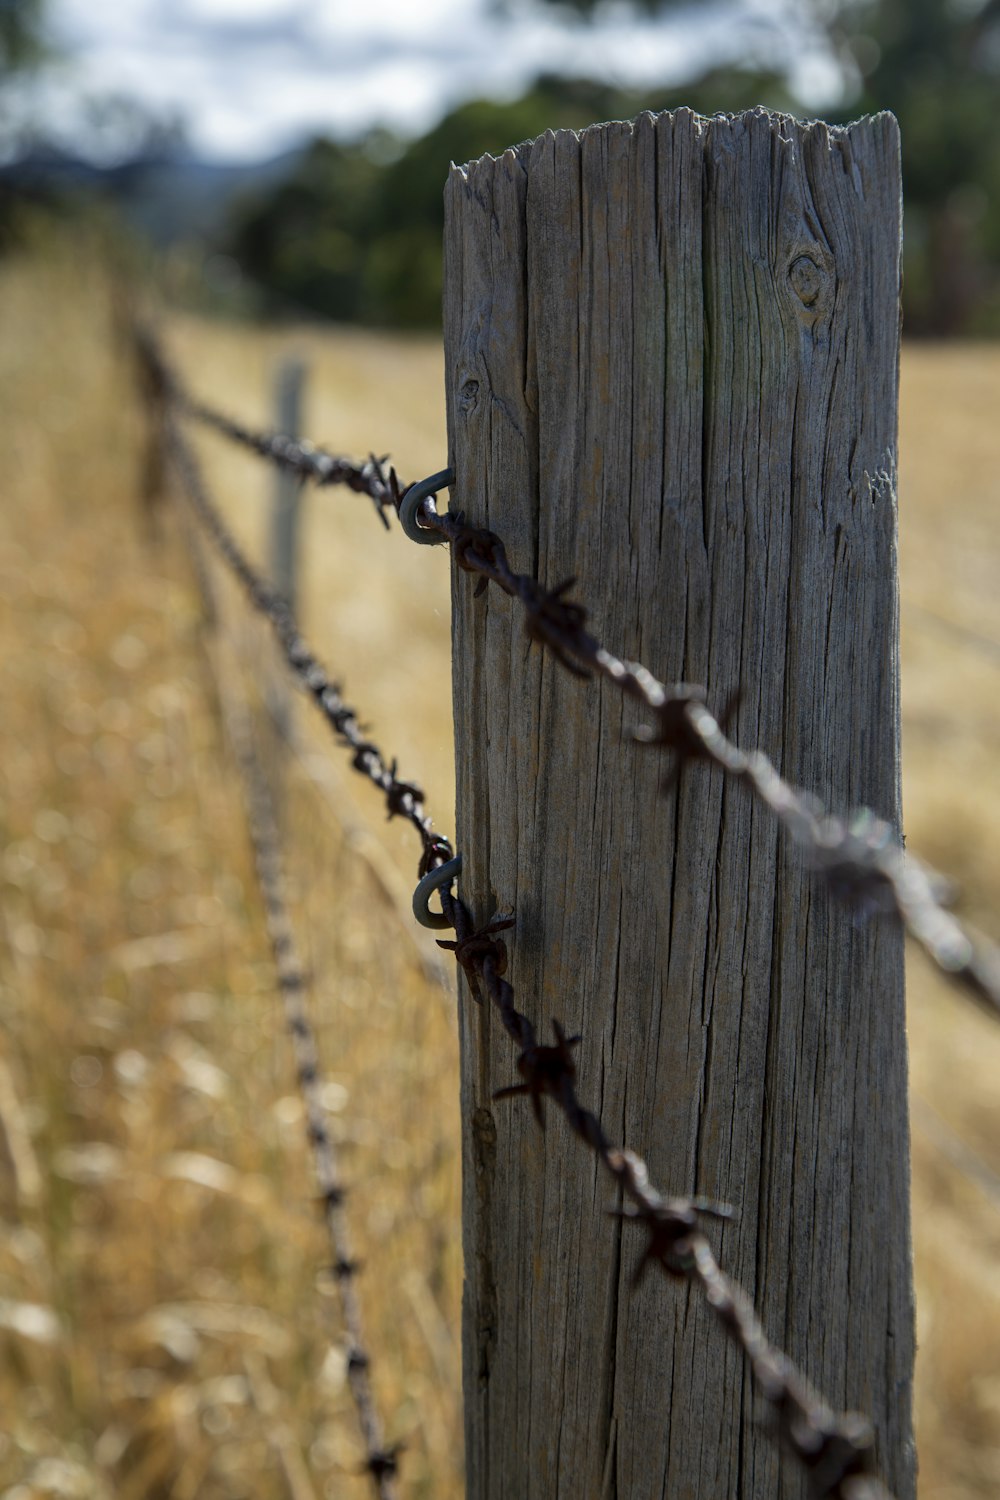 a close up of a wooden post with barbed wire